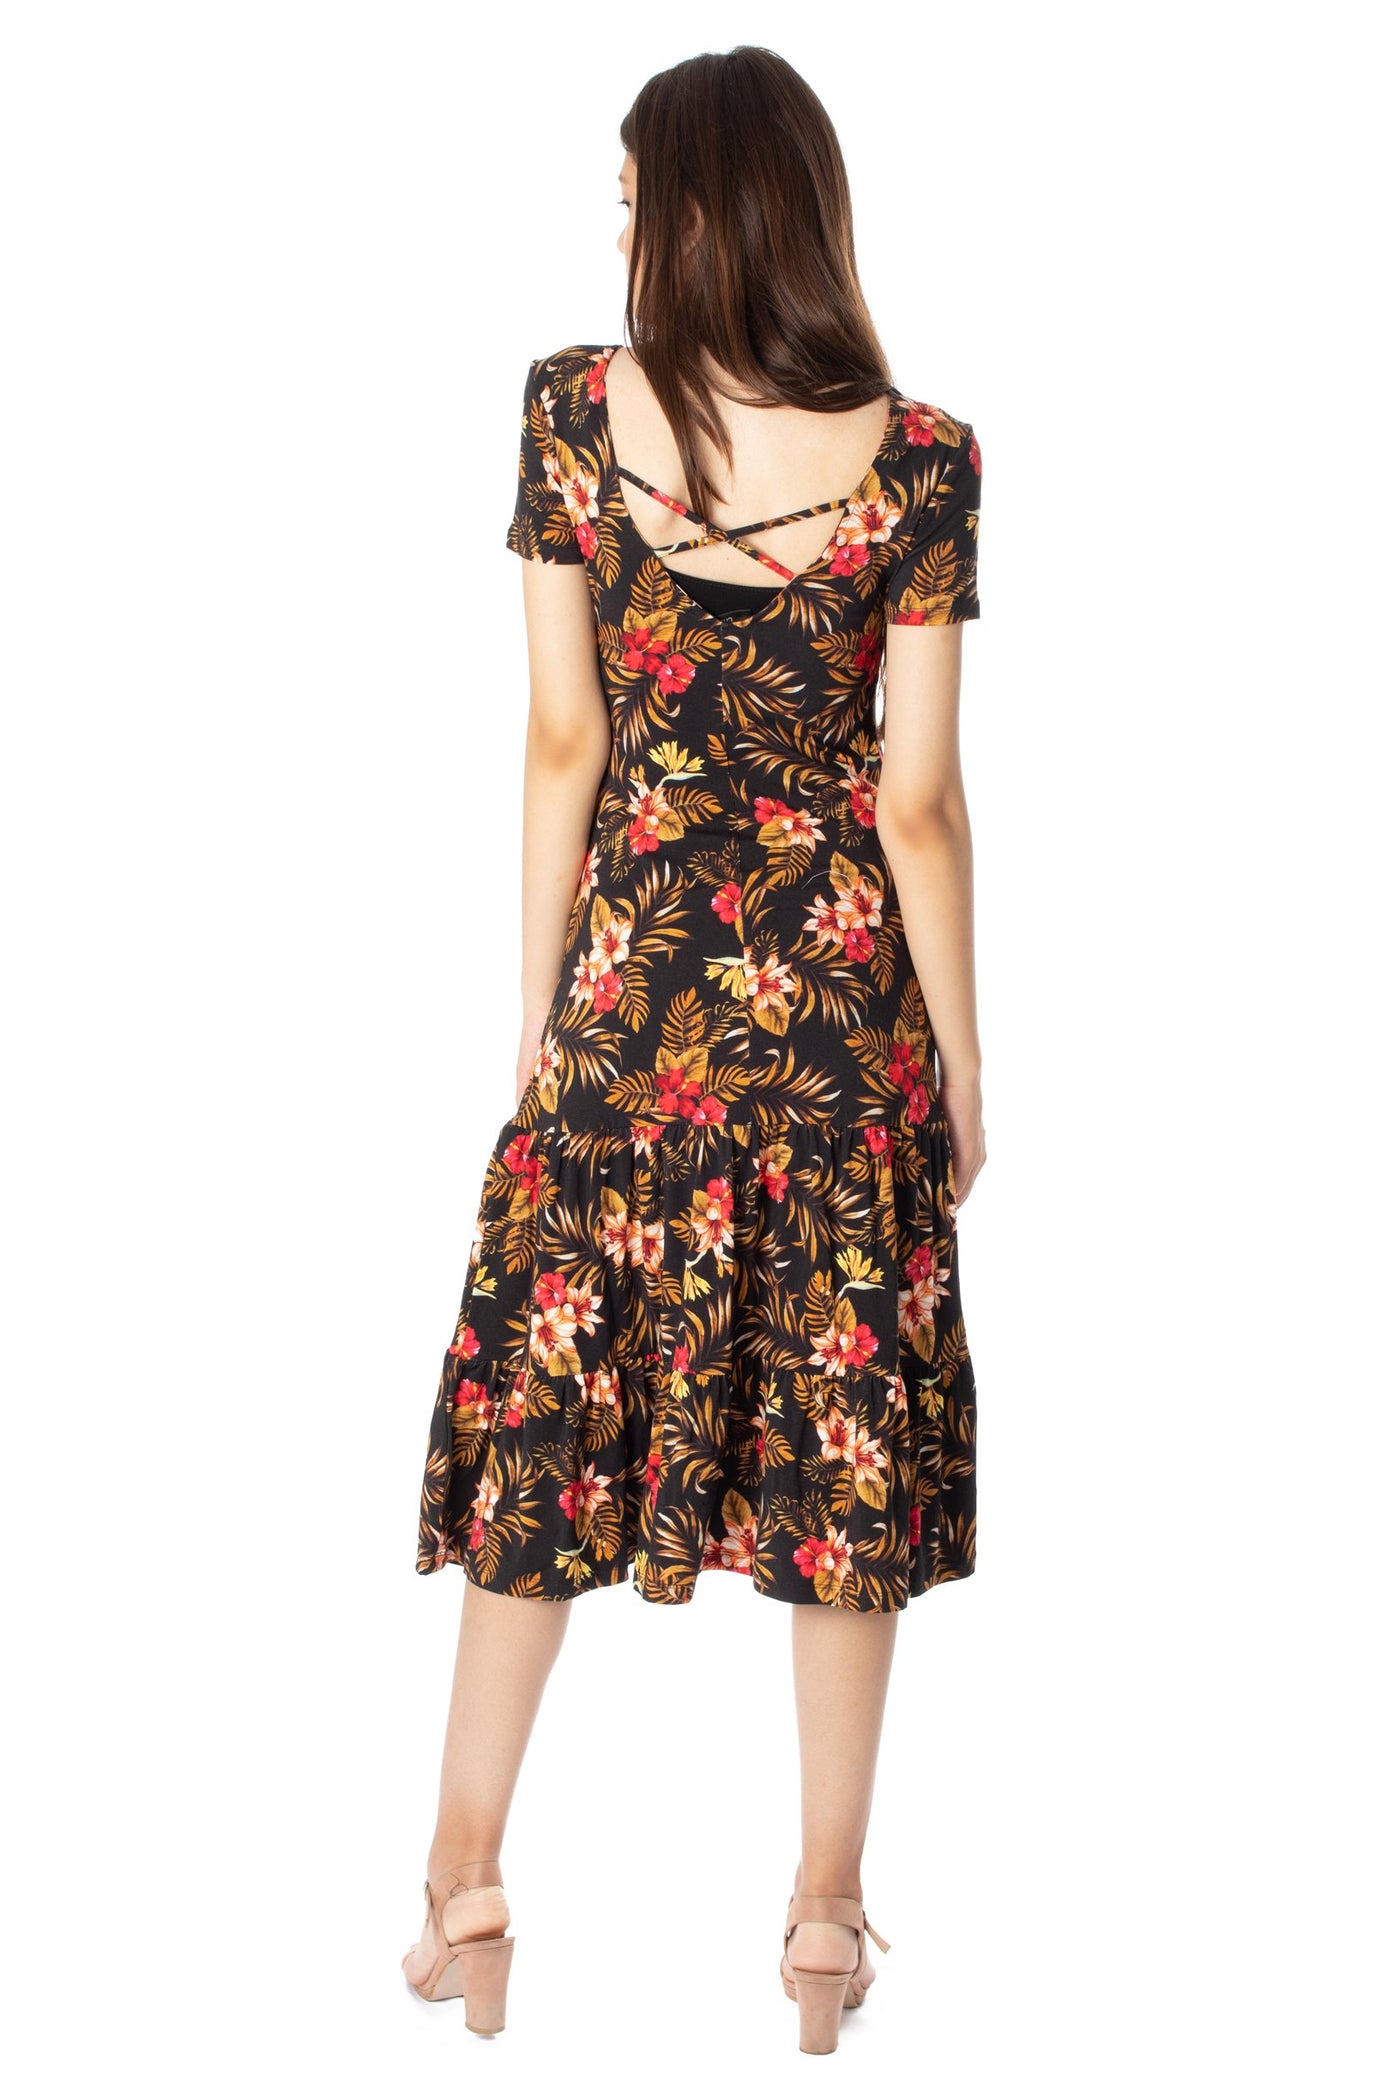 chassca floral printed short sleeve maxi dress with frill skirt - Breakmood